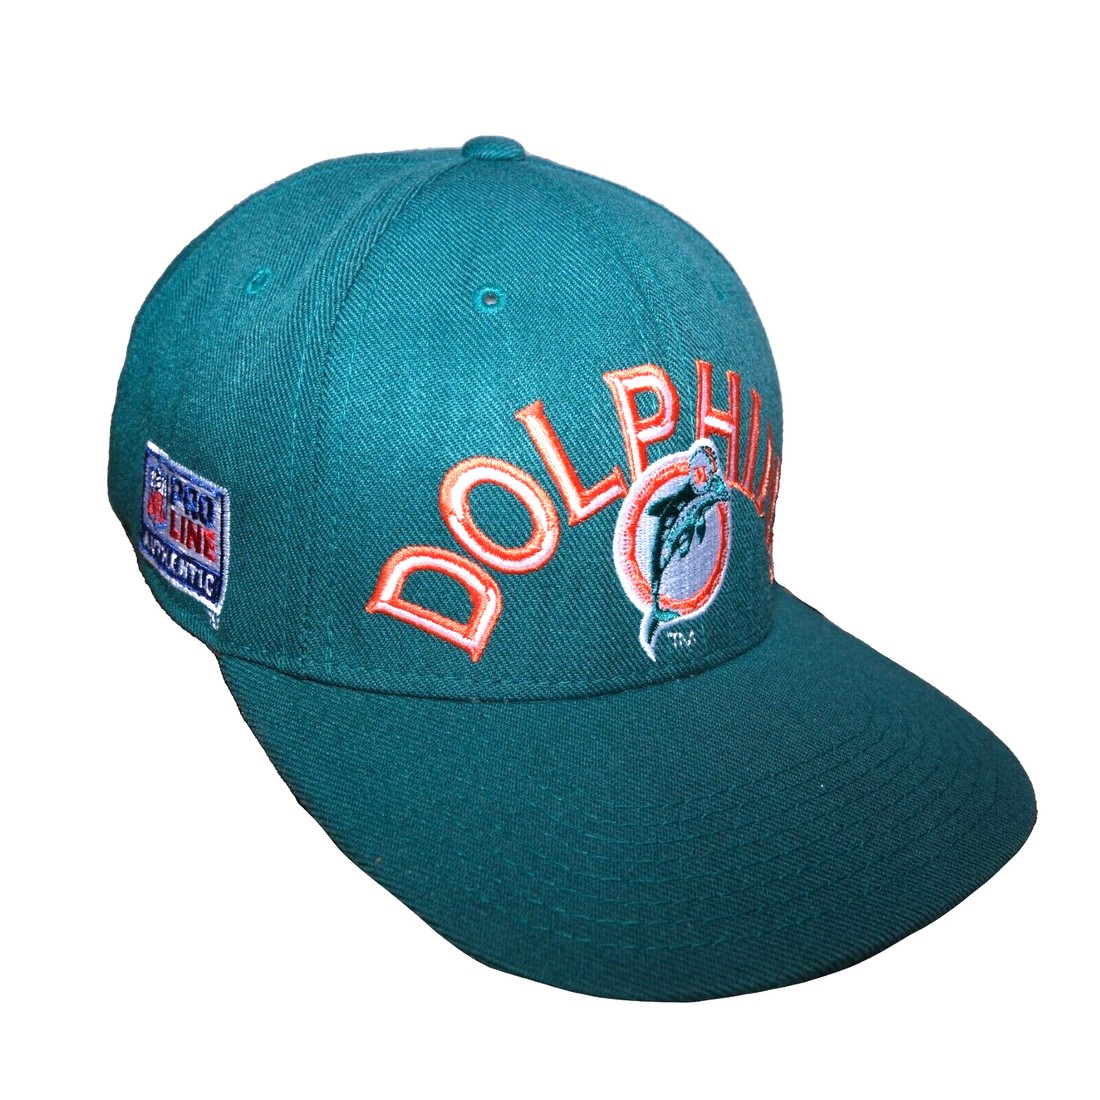 Vintage Miami Dolphins Sports Specialties Fitted Hat Size 7 1/4 Teal NFL